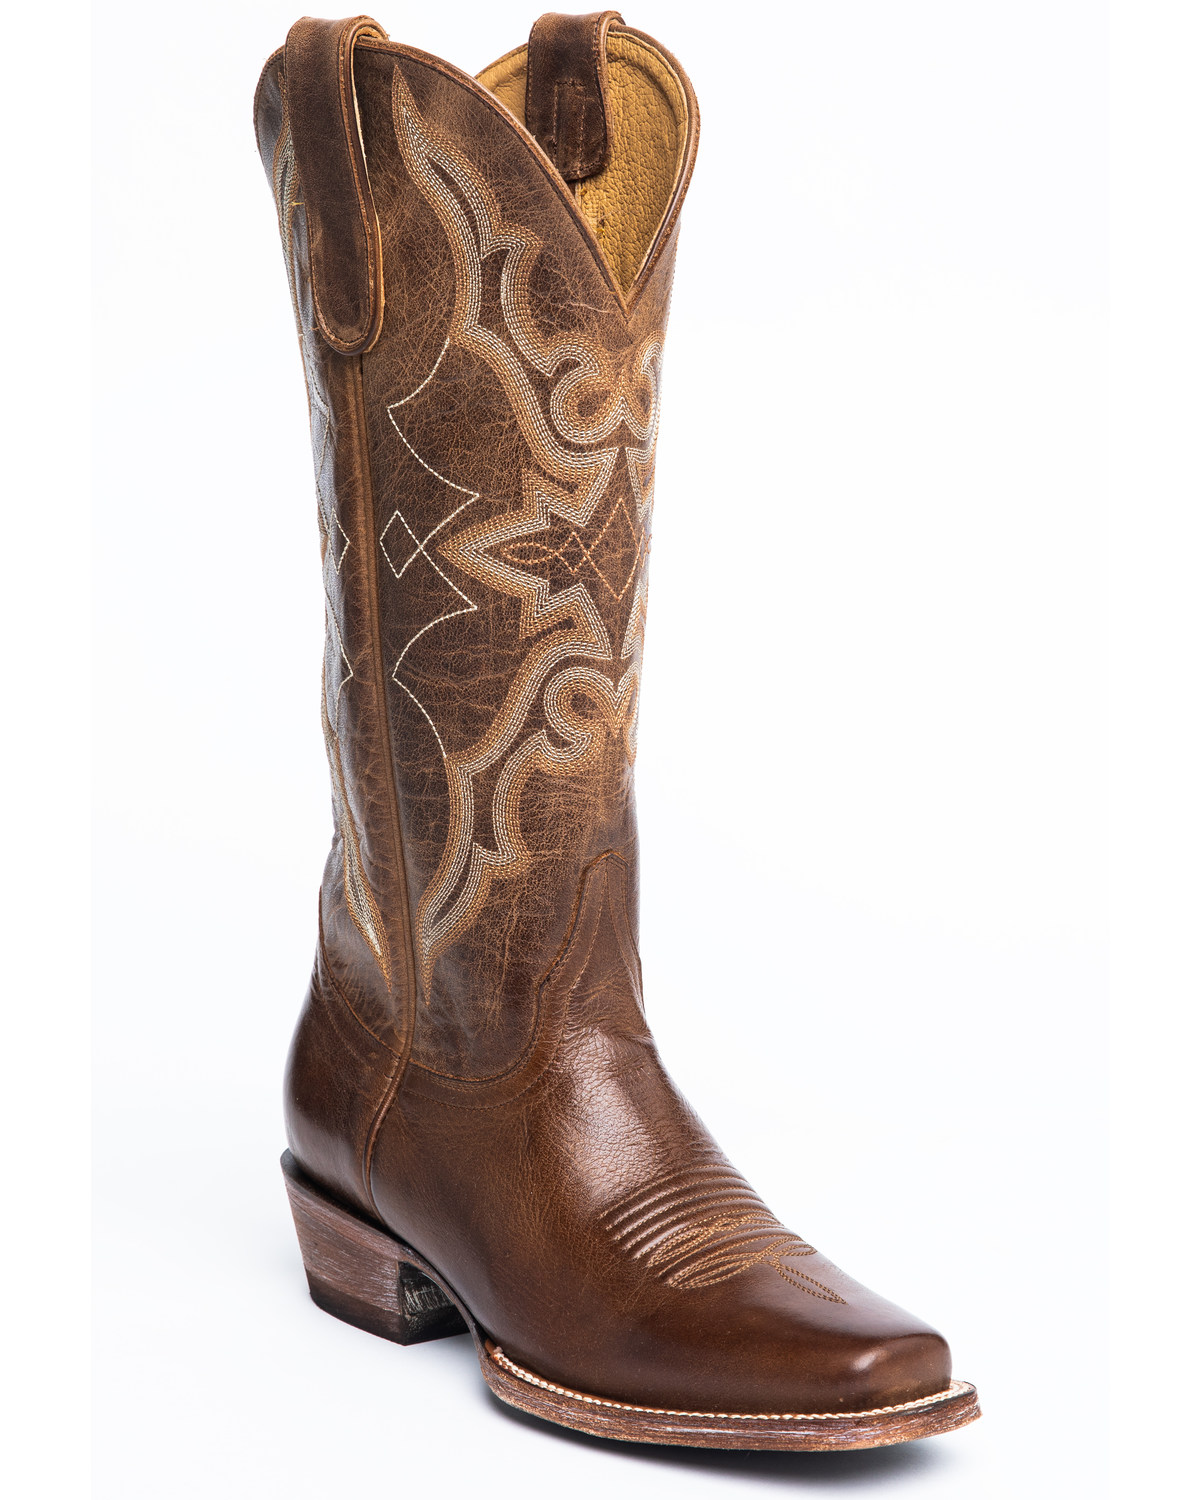 Idyllwind Women's Relic Western Boots 